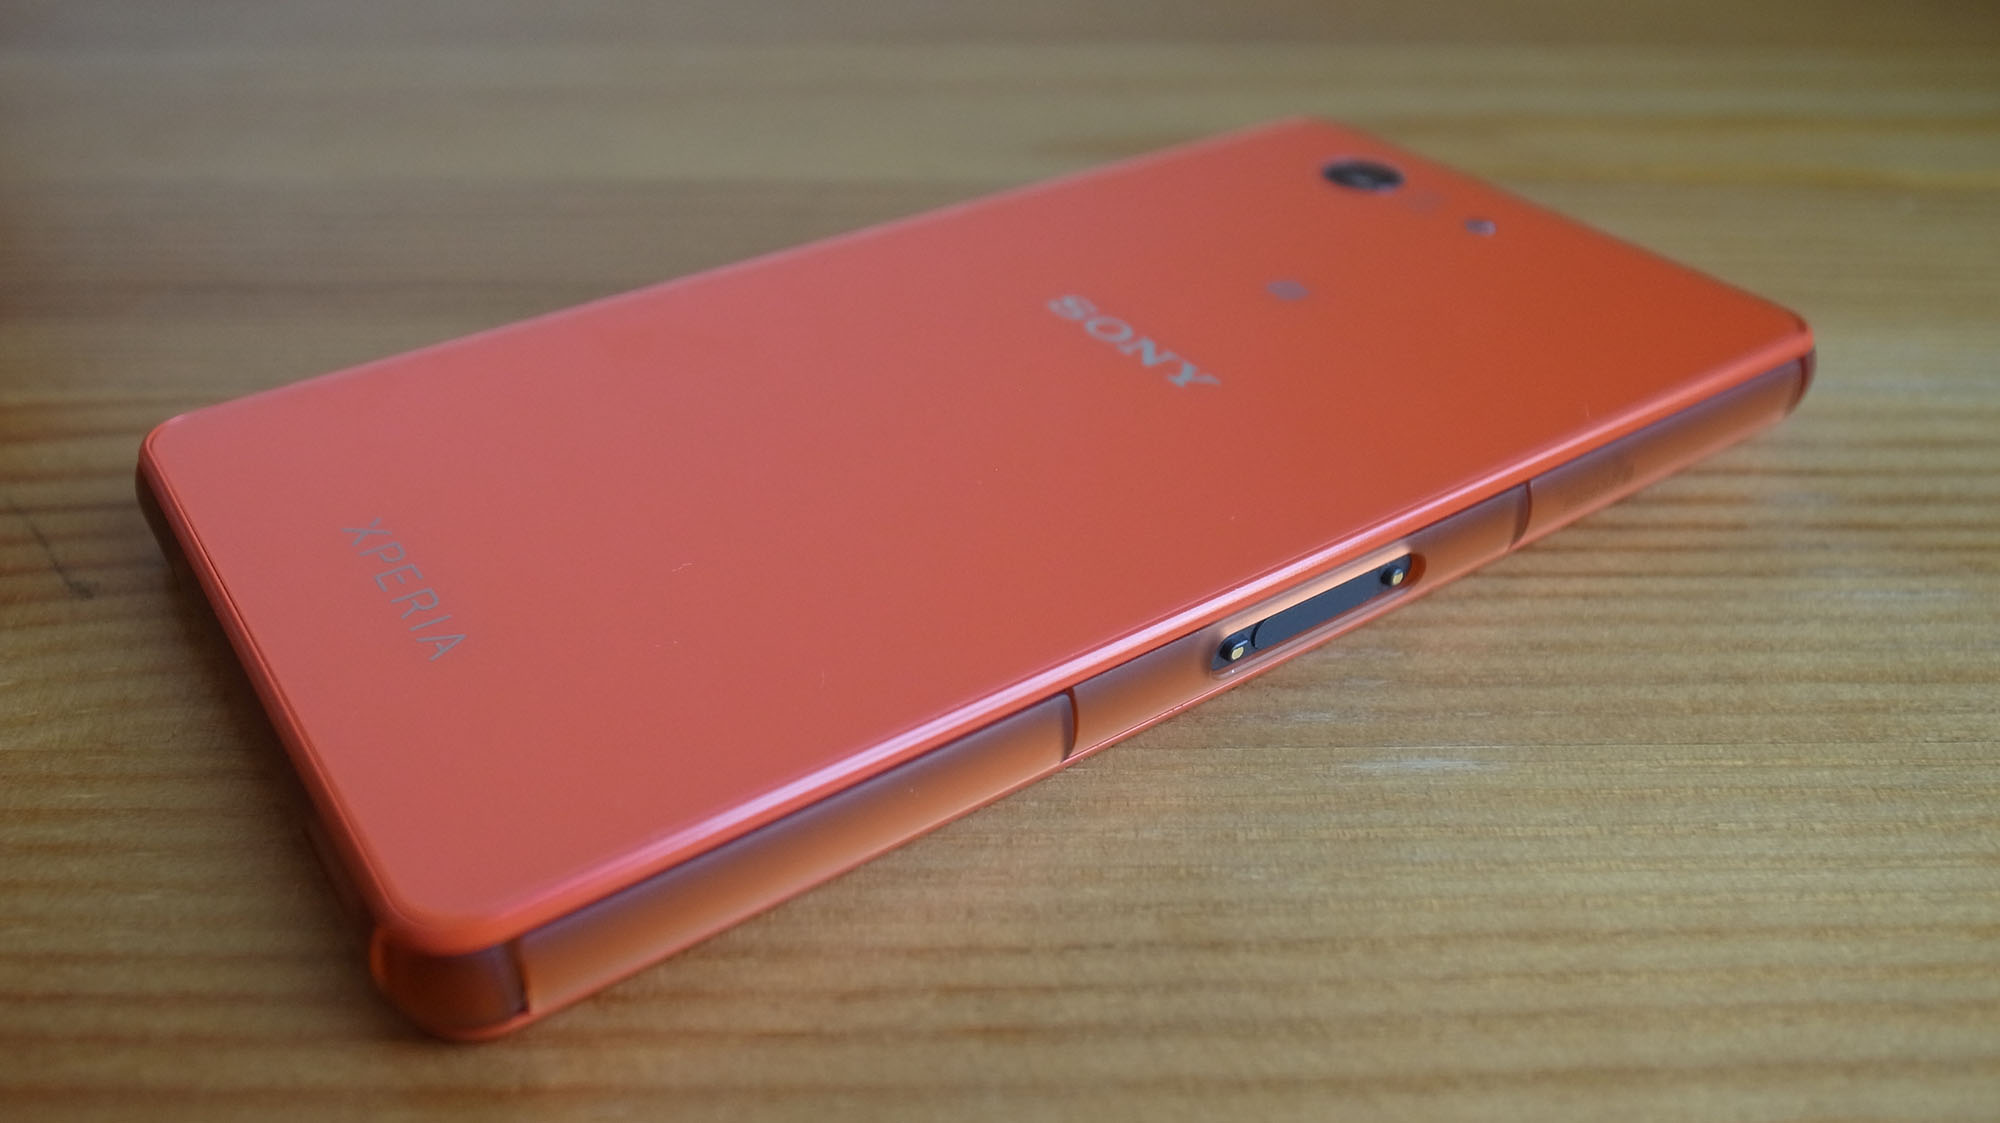 Xperia Z3 Compact ソフトウェアレビュー 地味な進化がけこう嬉しい感じになってます